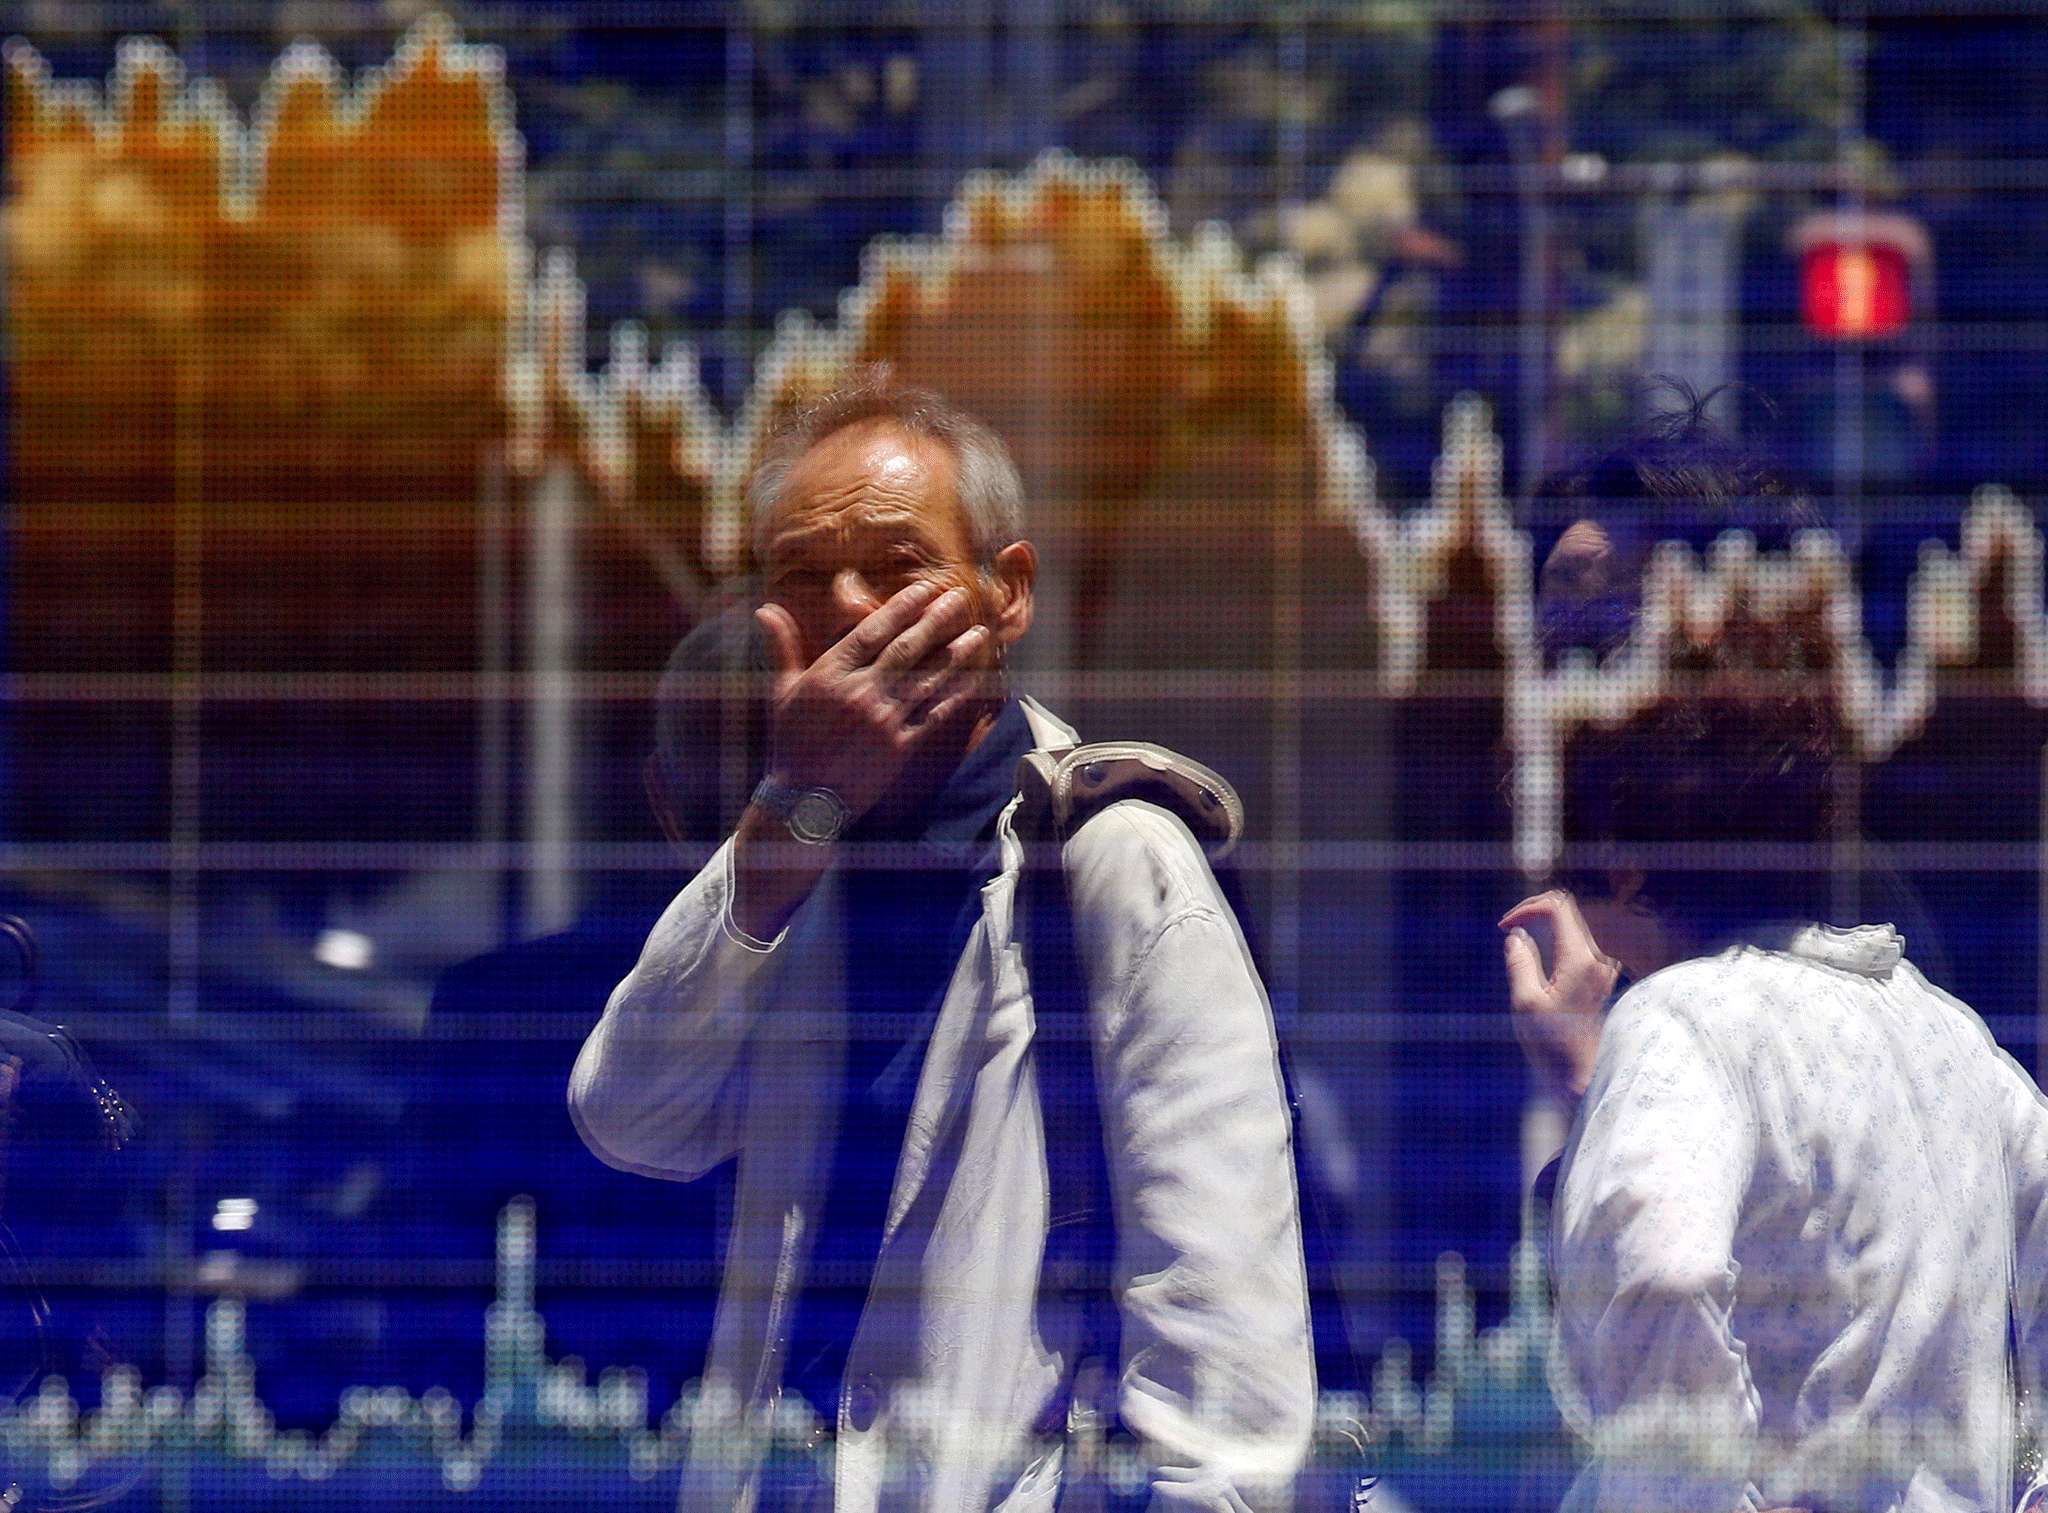 Japan's stock market has fallen on a stimulus package that disappointed markets